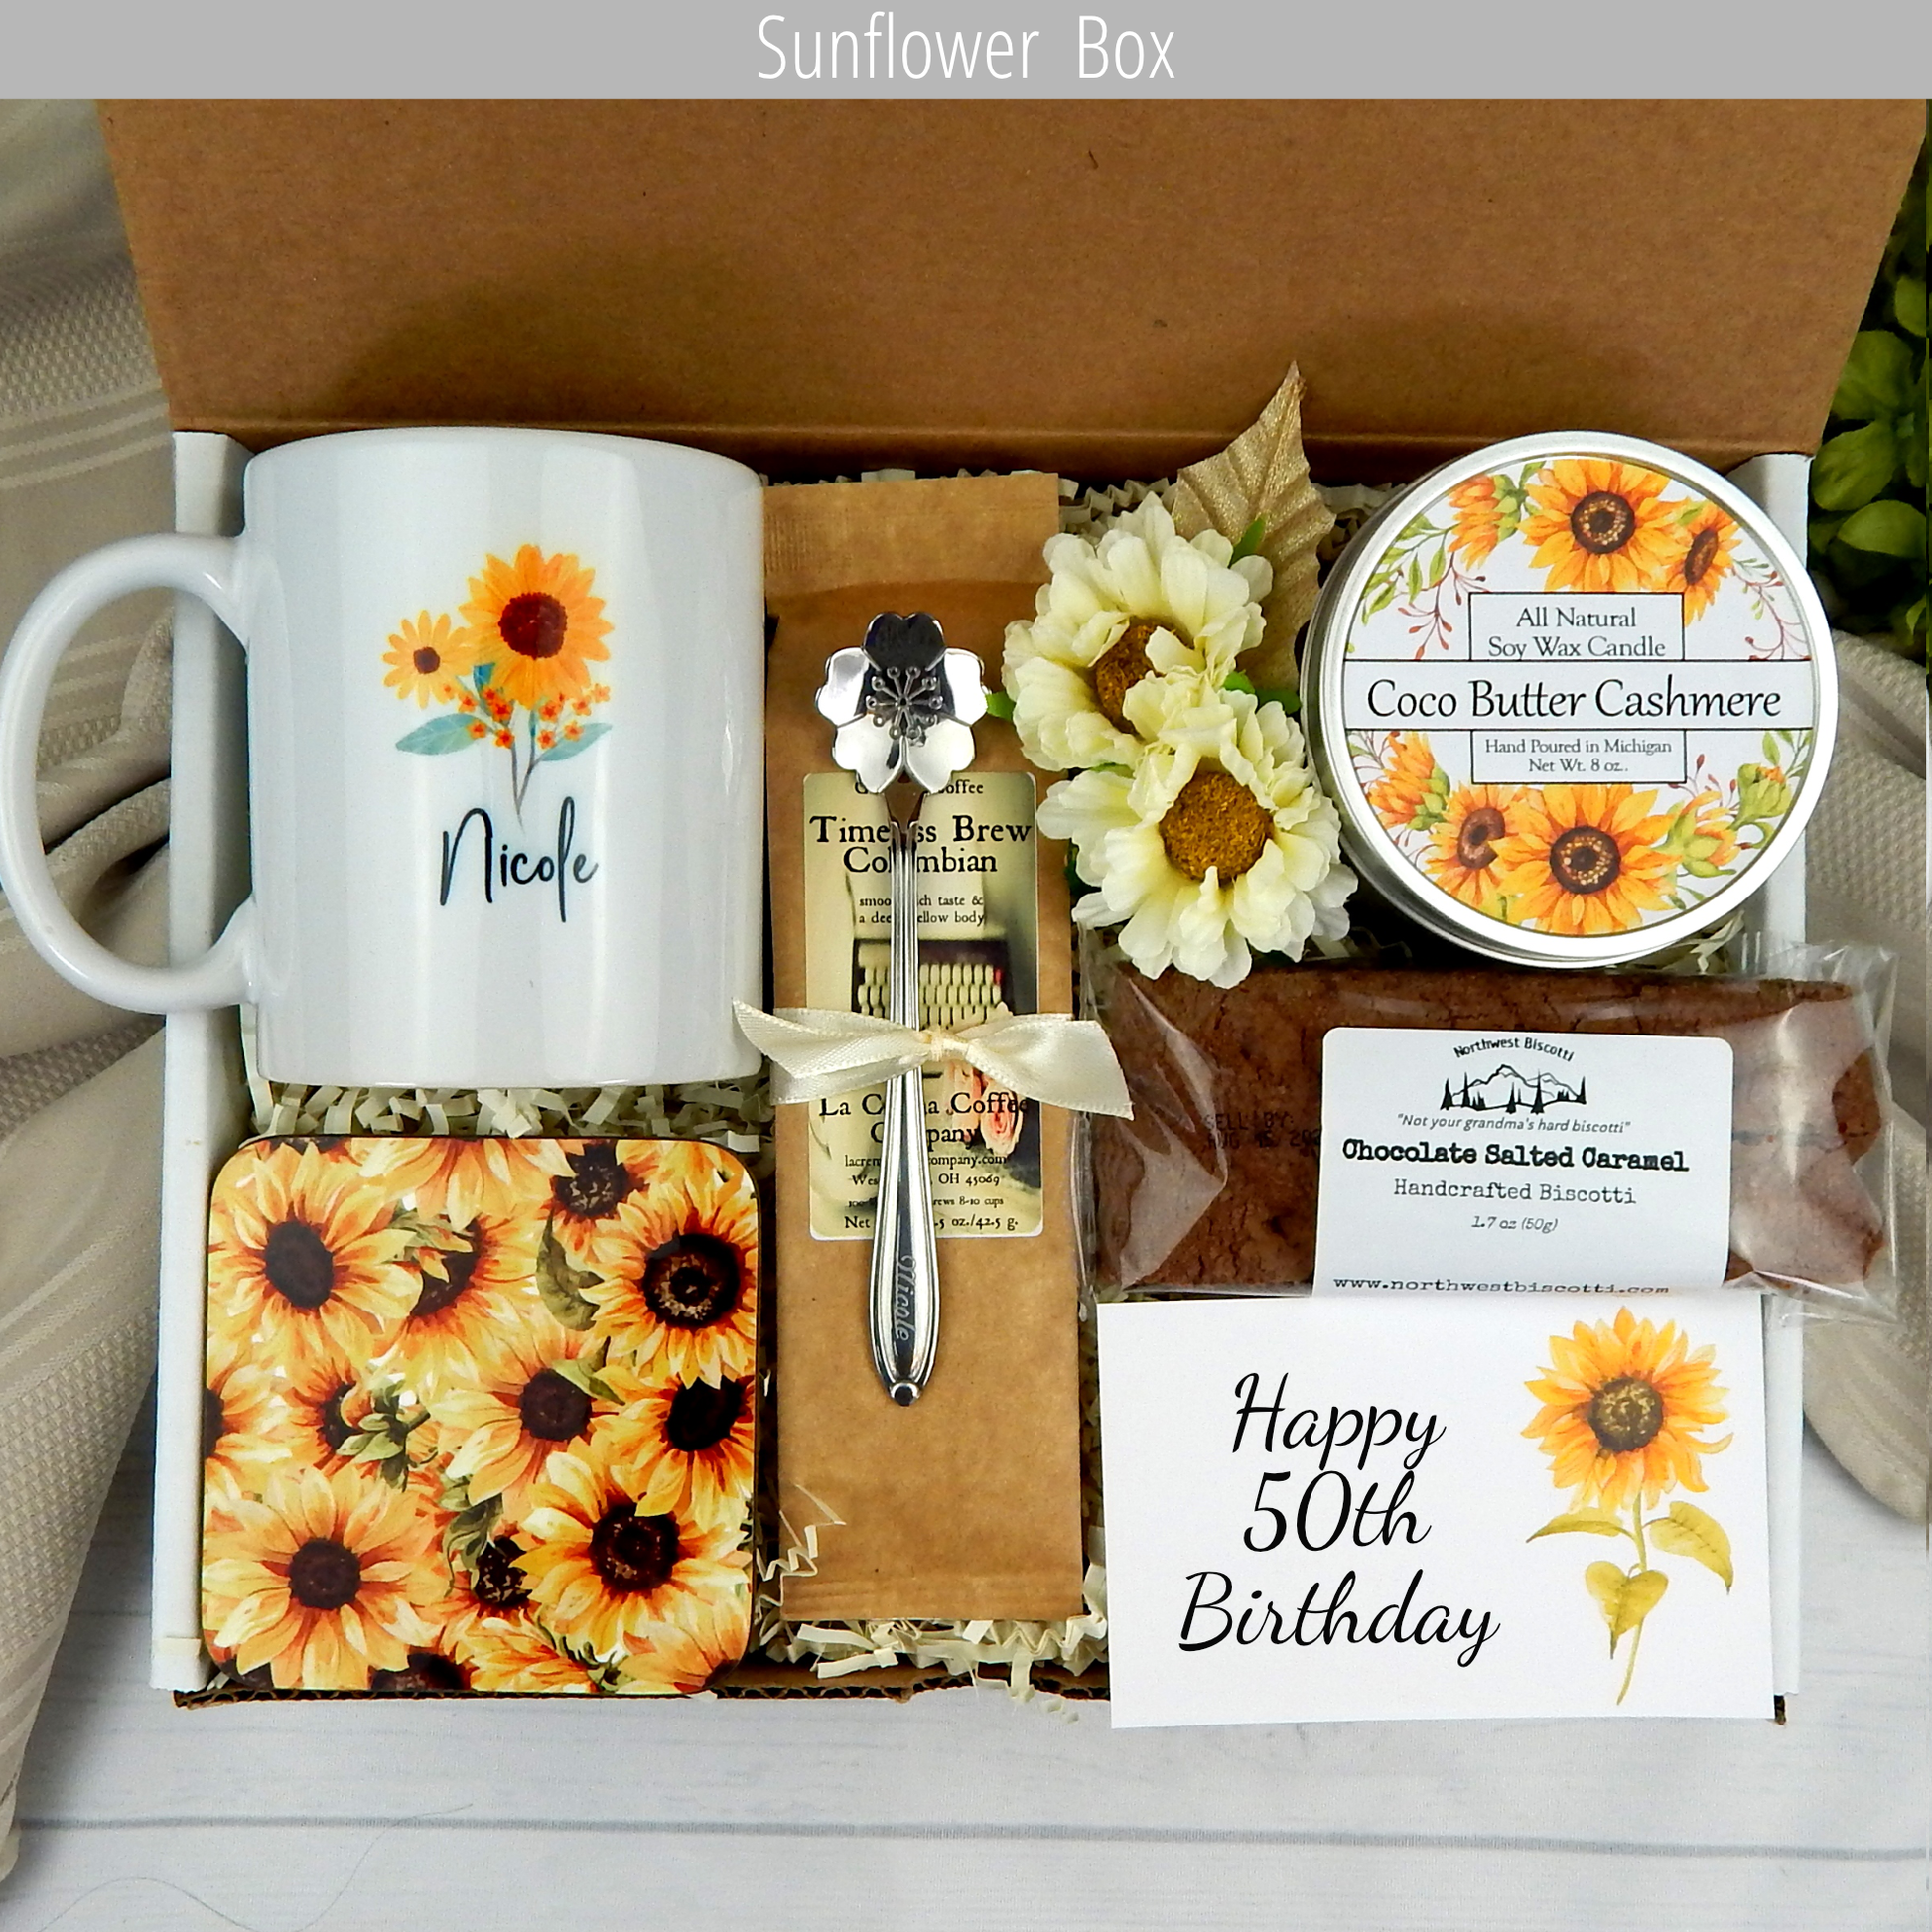 50th Birthday Personalized Gifts for Her